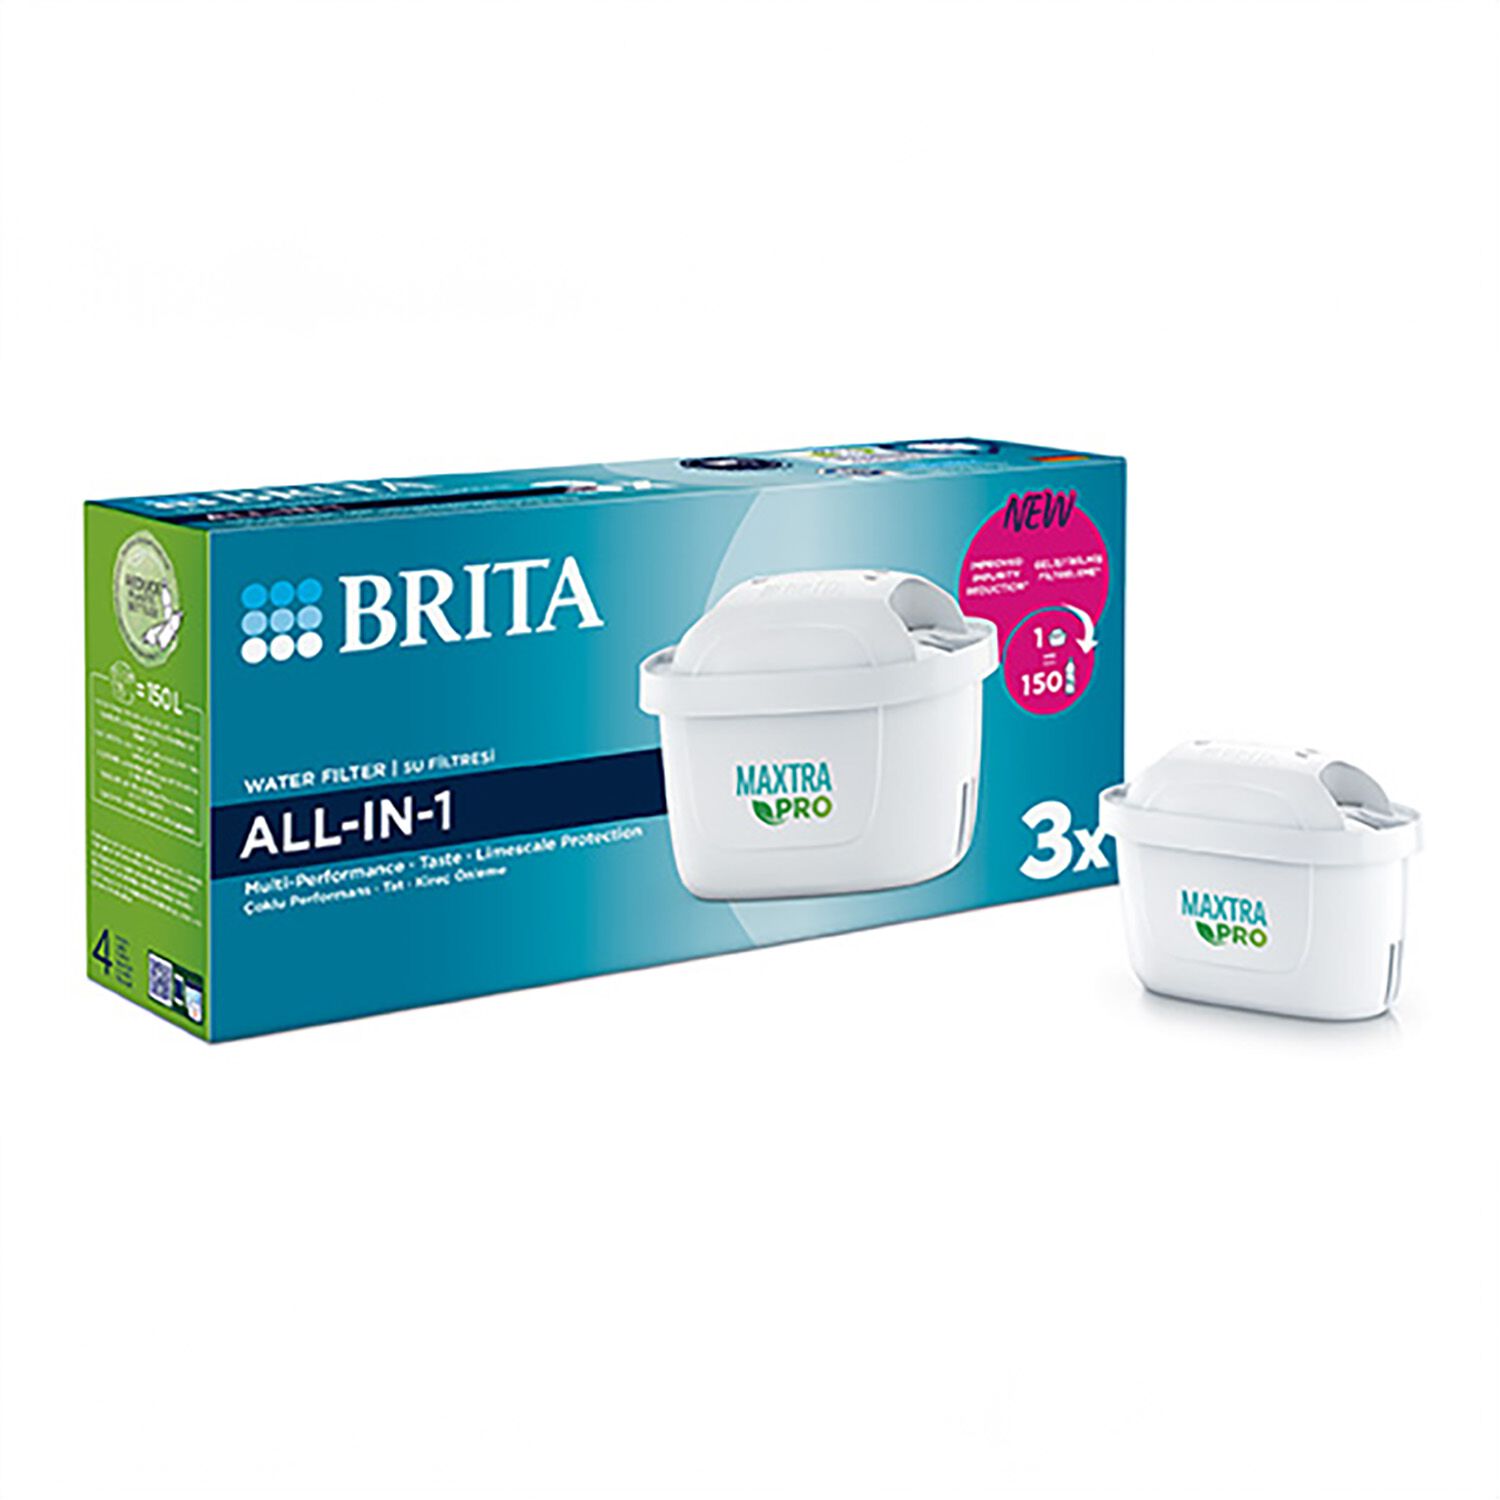 Buy Brita Maxtra Pro All-In-1 Filter Cartridges 3x3-pack cheaply